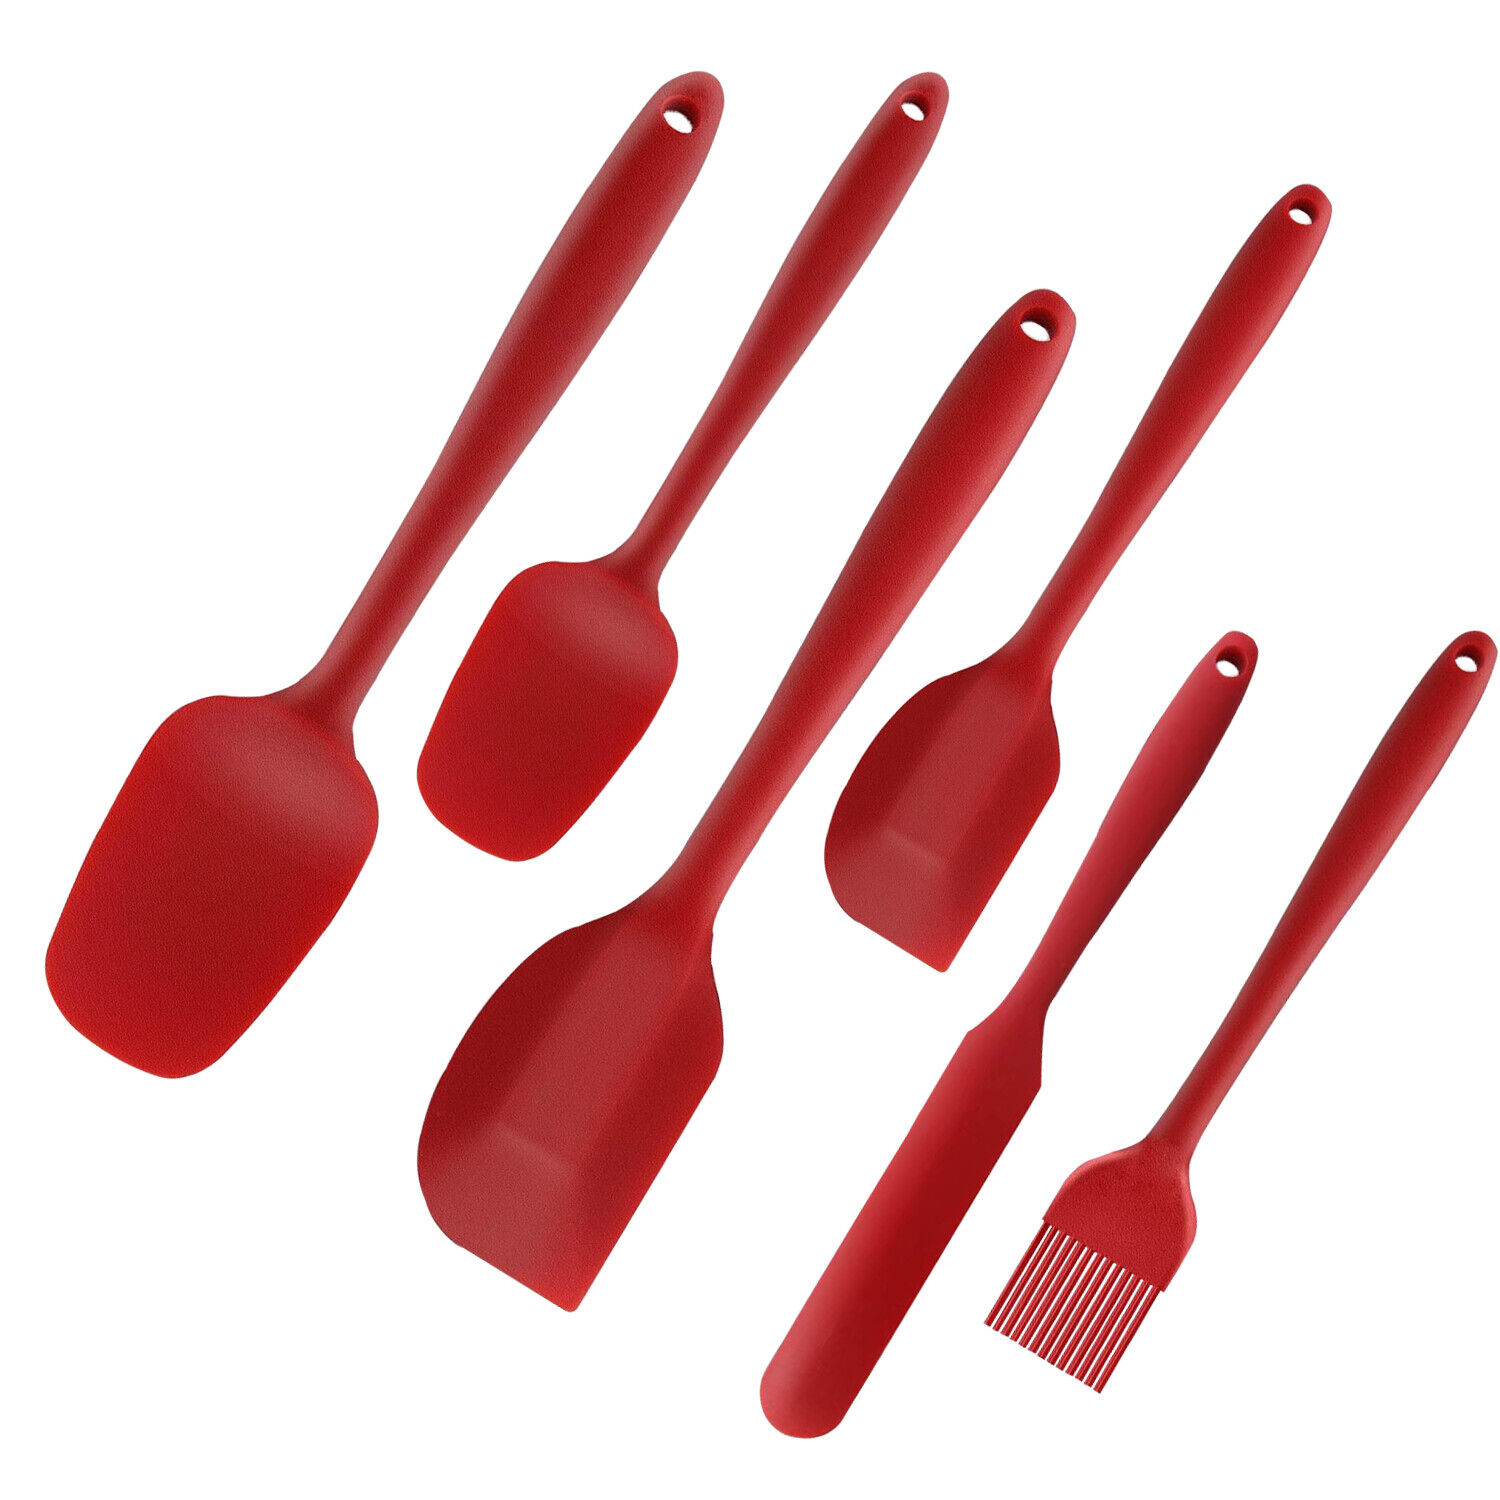 https://kitchenglora.com/wp-content/uploads/2023/03/AEX-6X-Silicone-Spatulas-for-Cooking-Utensils-Kitchen-Set-Non-Stick-Easy-to-Clean-Spatulas-Spoons-Set-with-Baking-Brush-Non-Stick-and-Heat-Resistant-10.jpg